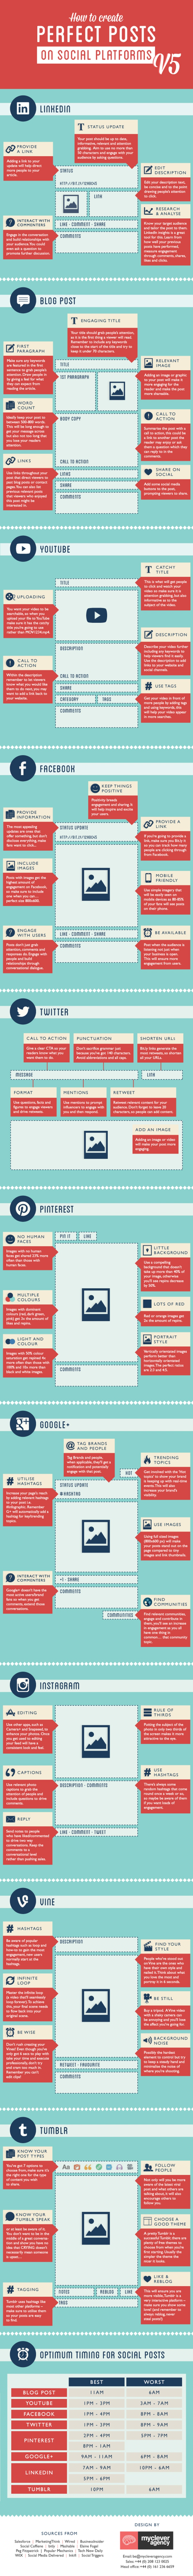 How To Create Perfect Posts [INFOGRAPHIC] - Unbounce | The MarTech Digest | Scoop.it